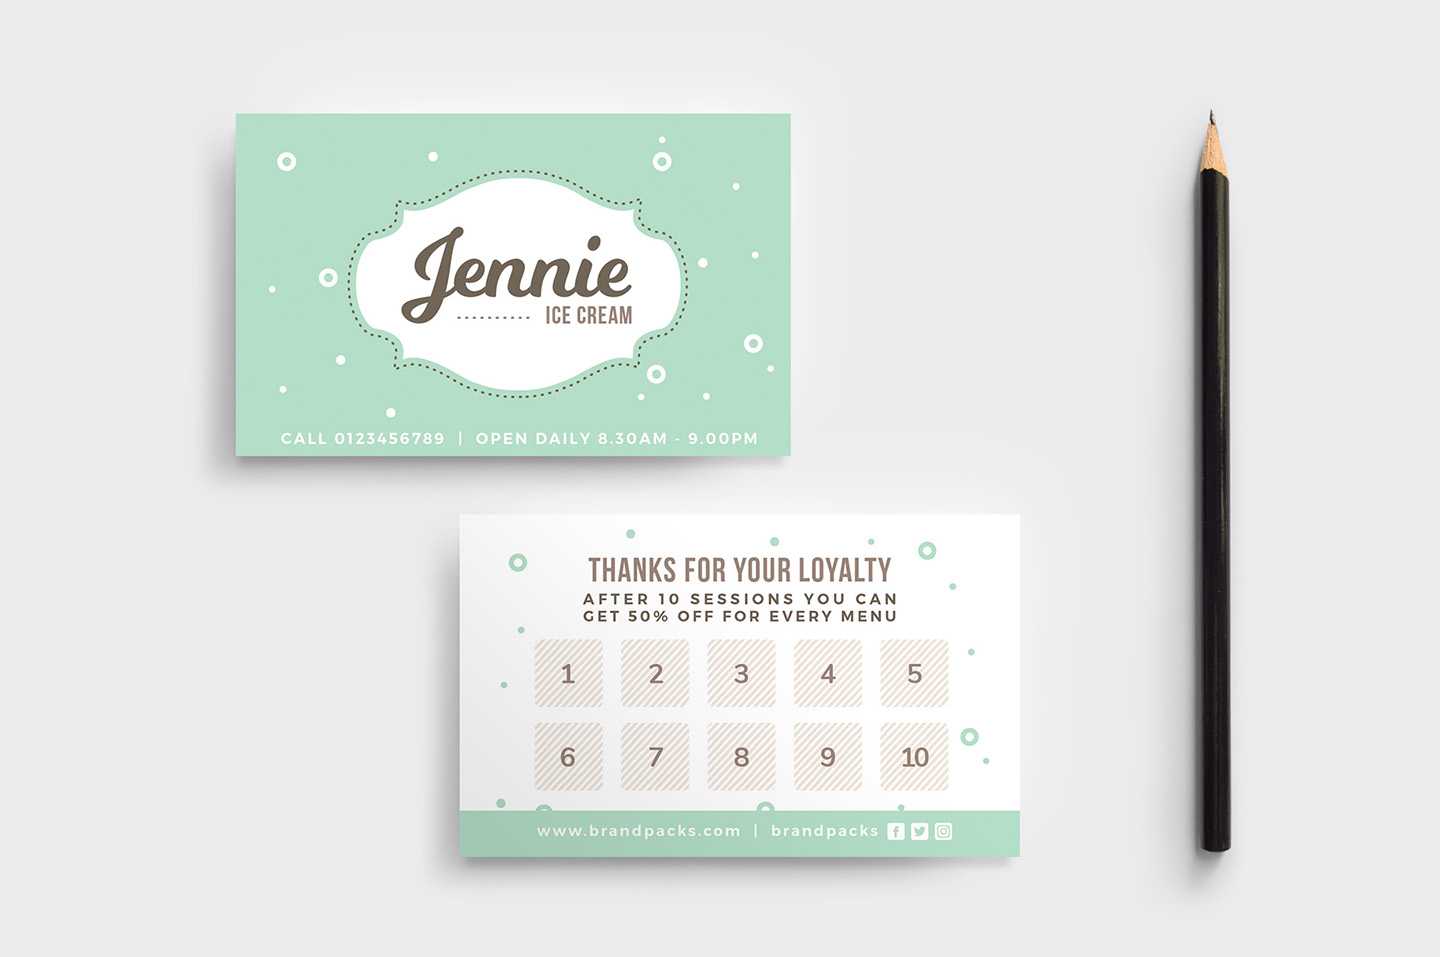 Free Loyalty Card Templates - Psd, Ai & Vector - Brandpacks With Regard To Template For Membership Cards